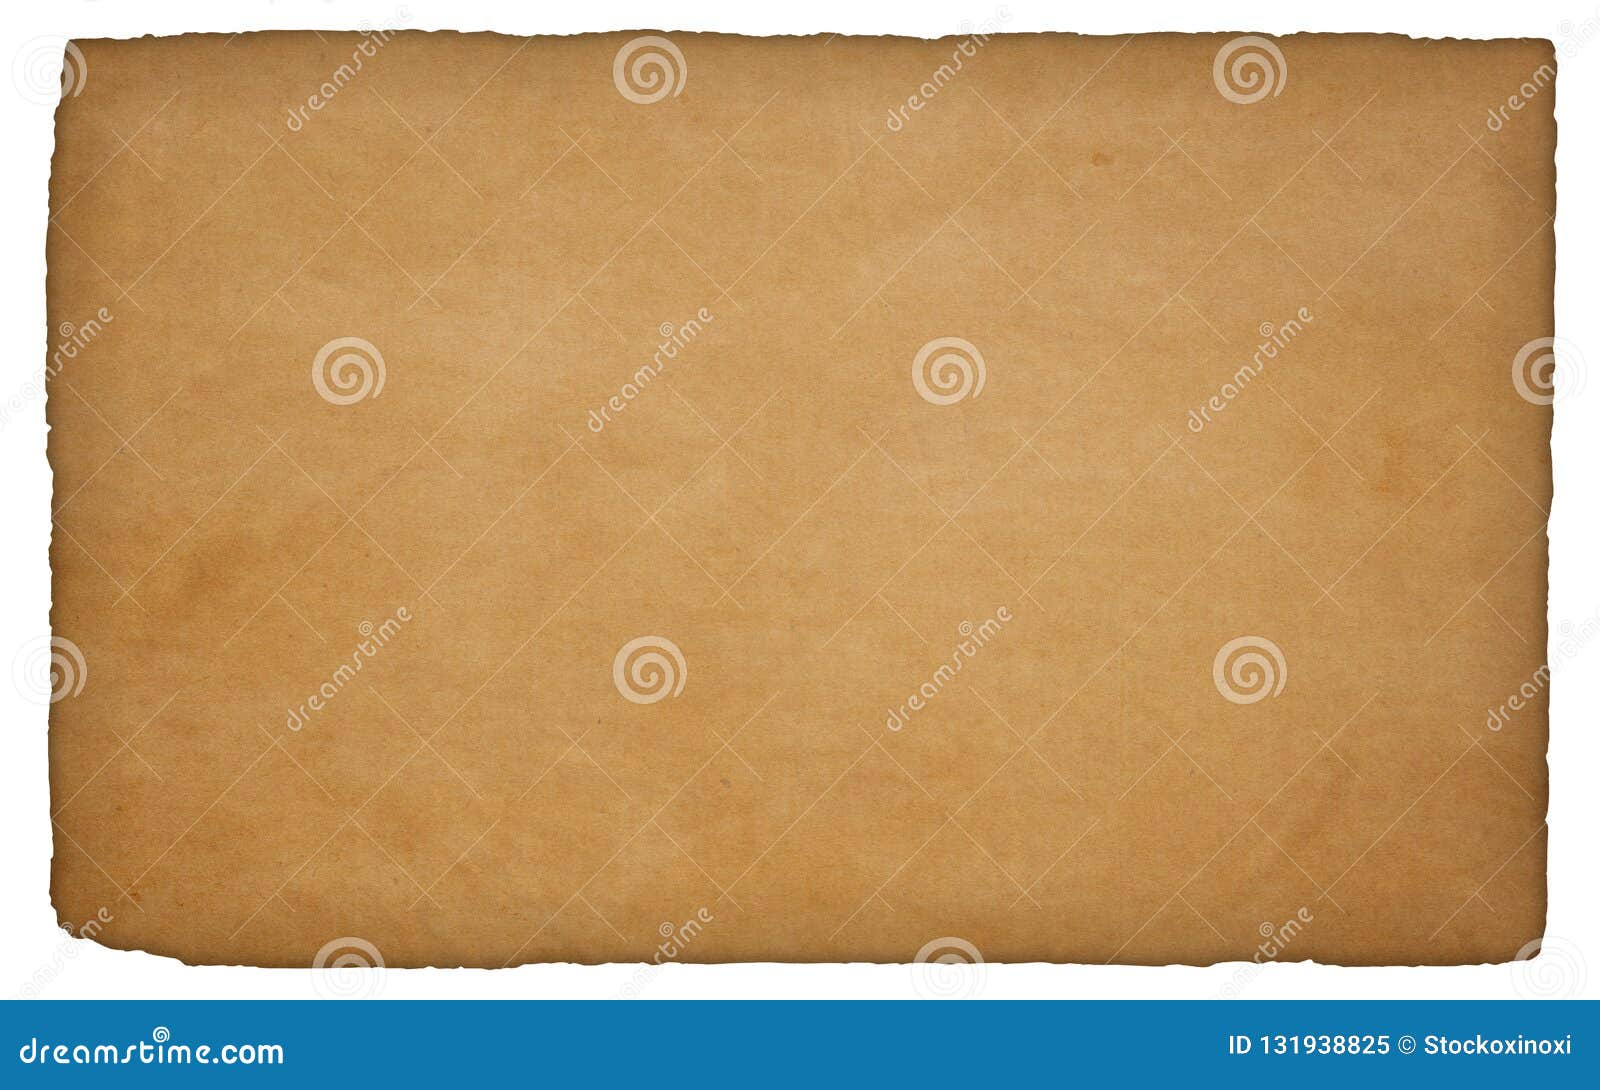 Old rough paper stock image. Image of canvas, high, material - 131938825